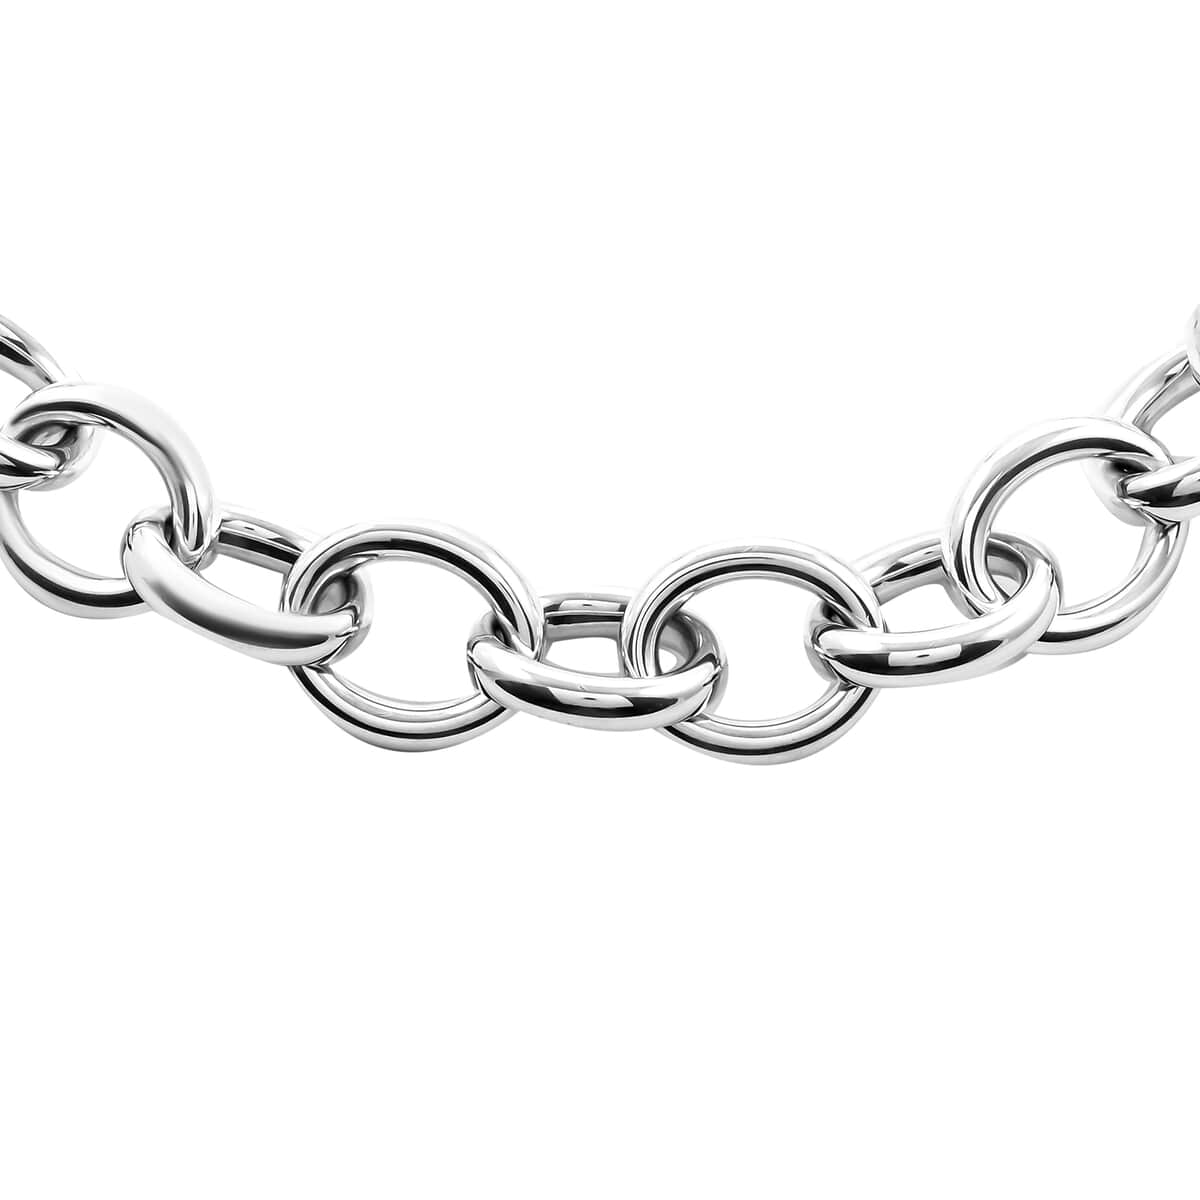 Majul & Co. One Of A Kind Sterling Silver Tubular Link Necklace 24 Inches Hand-Made in Mexico 113 Grams image number 0